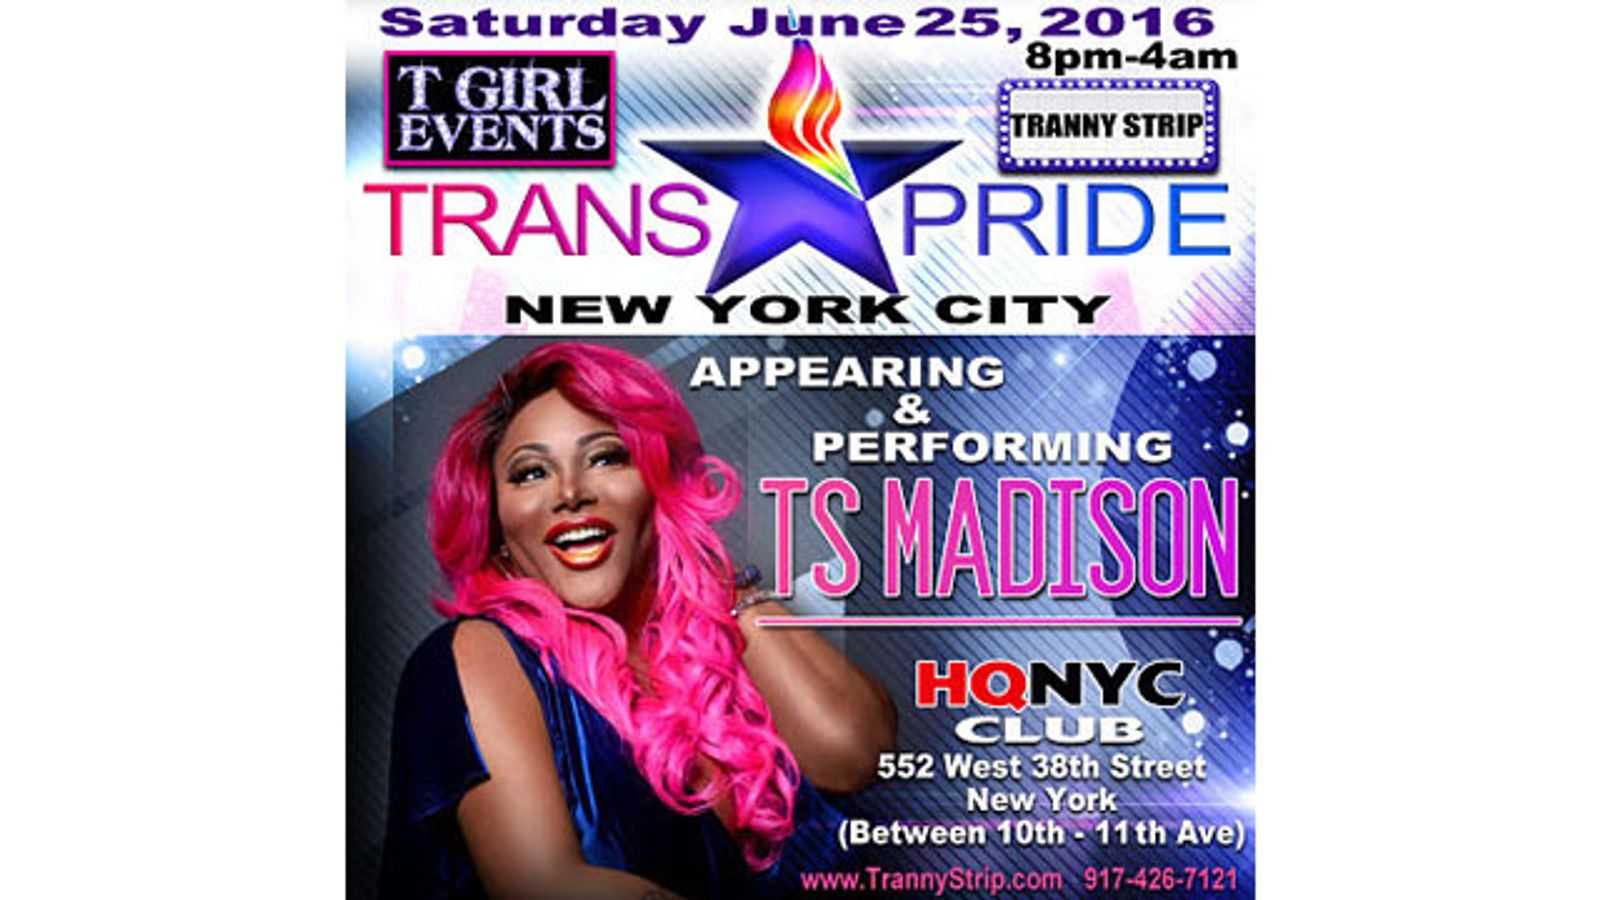 TGirl Events Hosting Trans Pride NYC Party at HQNYC With TS Madison